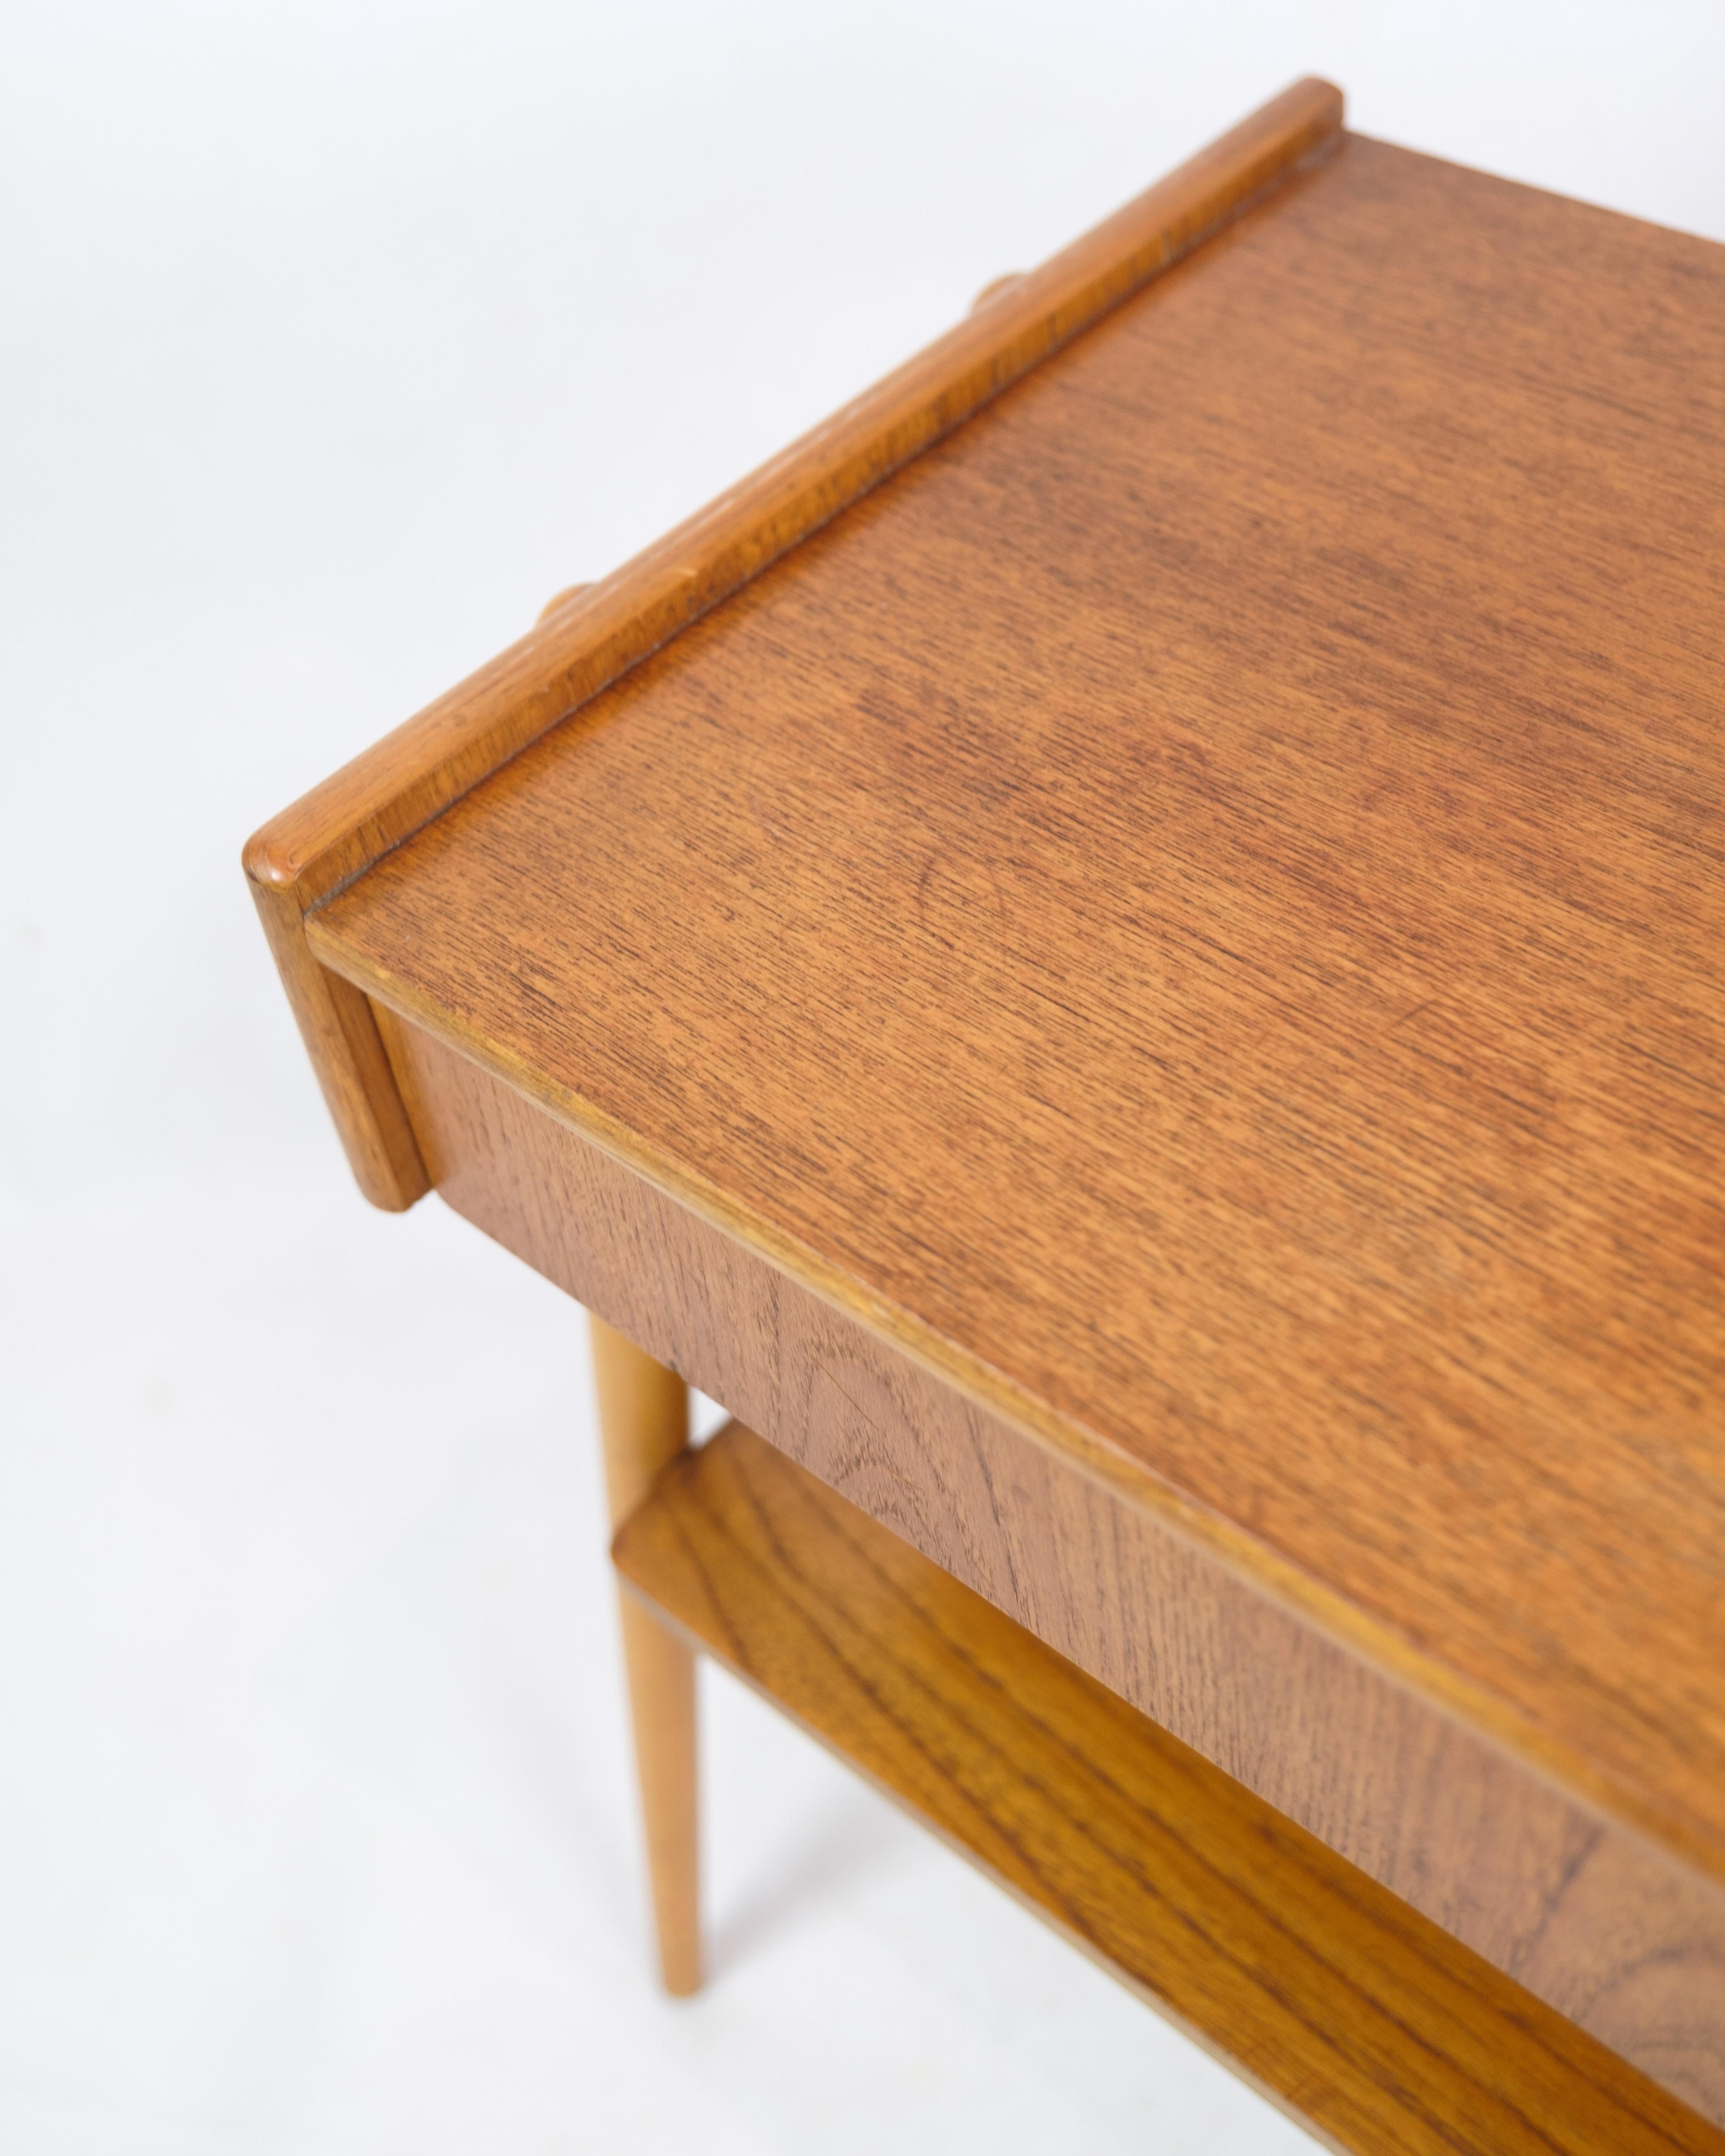 Set of Nightstands In Teak, By AB Carlström & Co Furniture Factory From 1950s In Good Condition For Sale In Lejre, DK